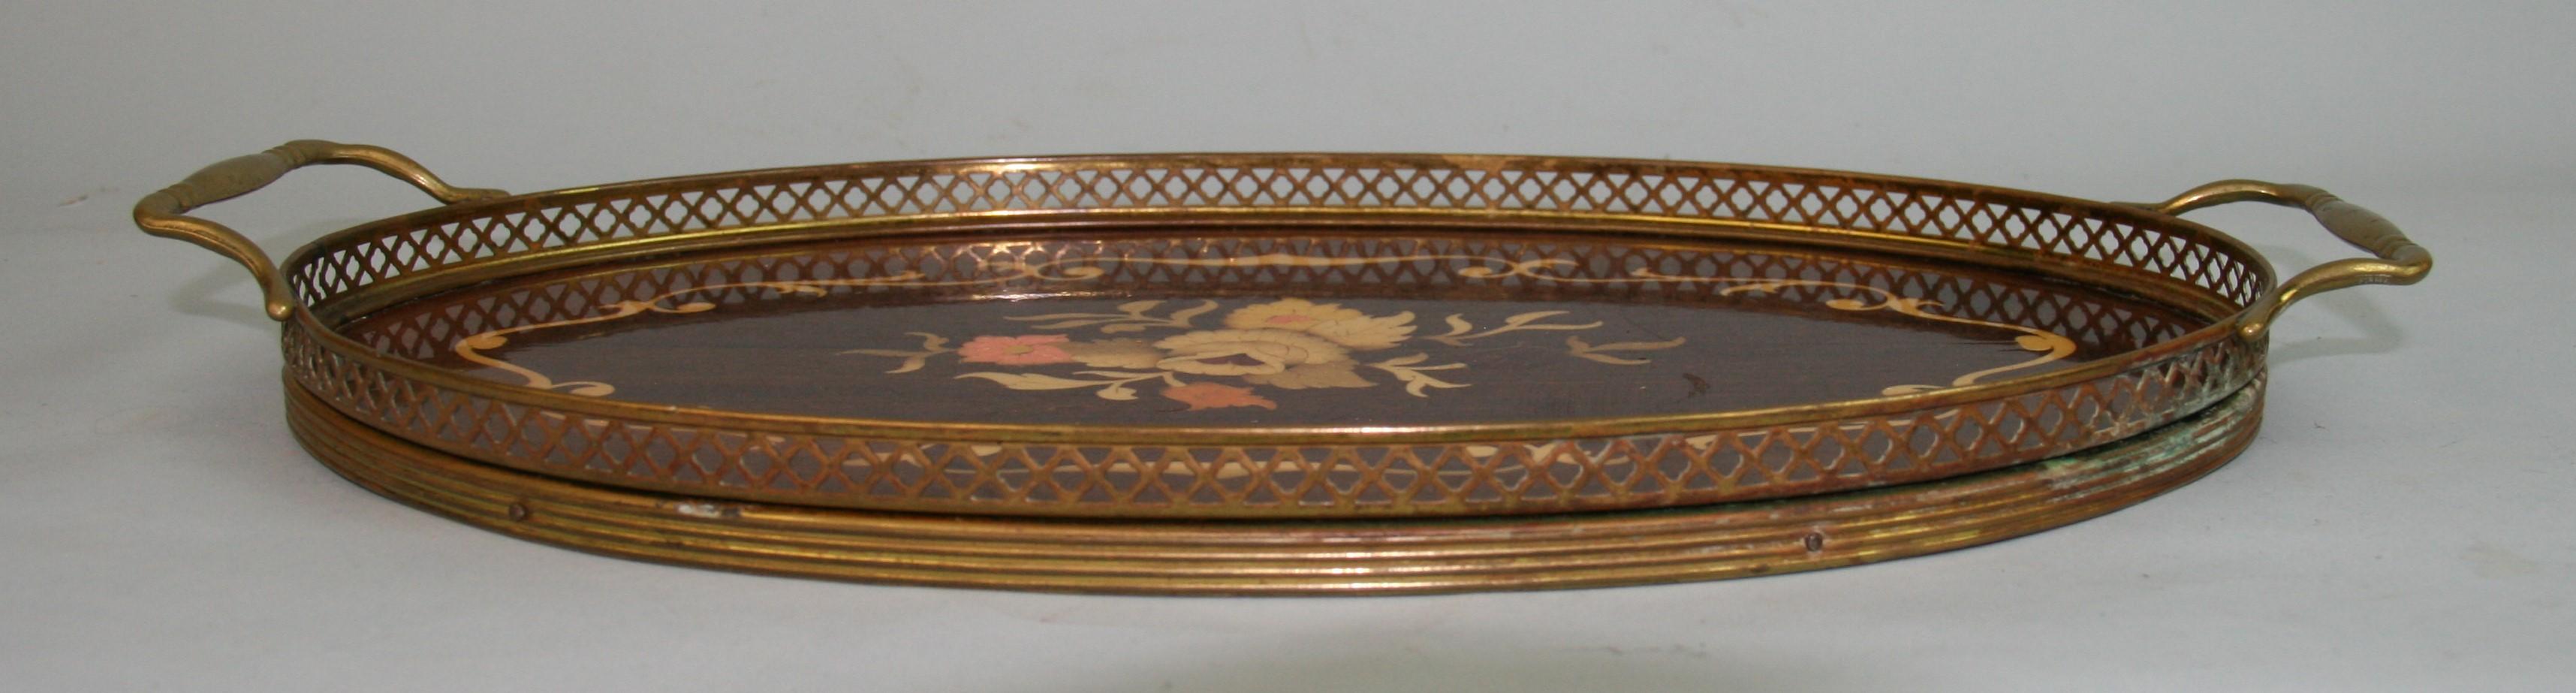 Italian Serving Tray Inlaid Wood Brass Rim and Handles, 1960's For Sale 5